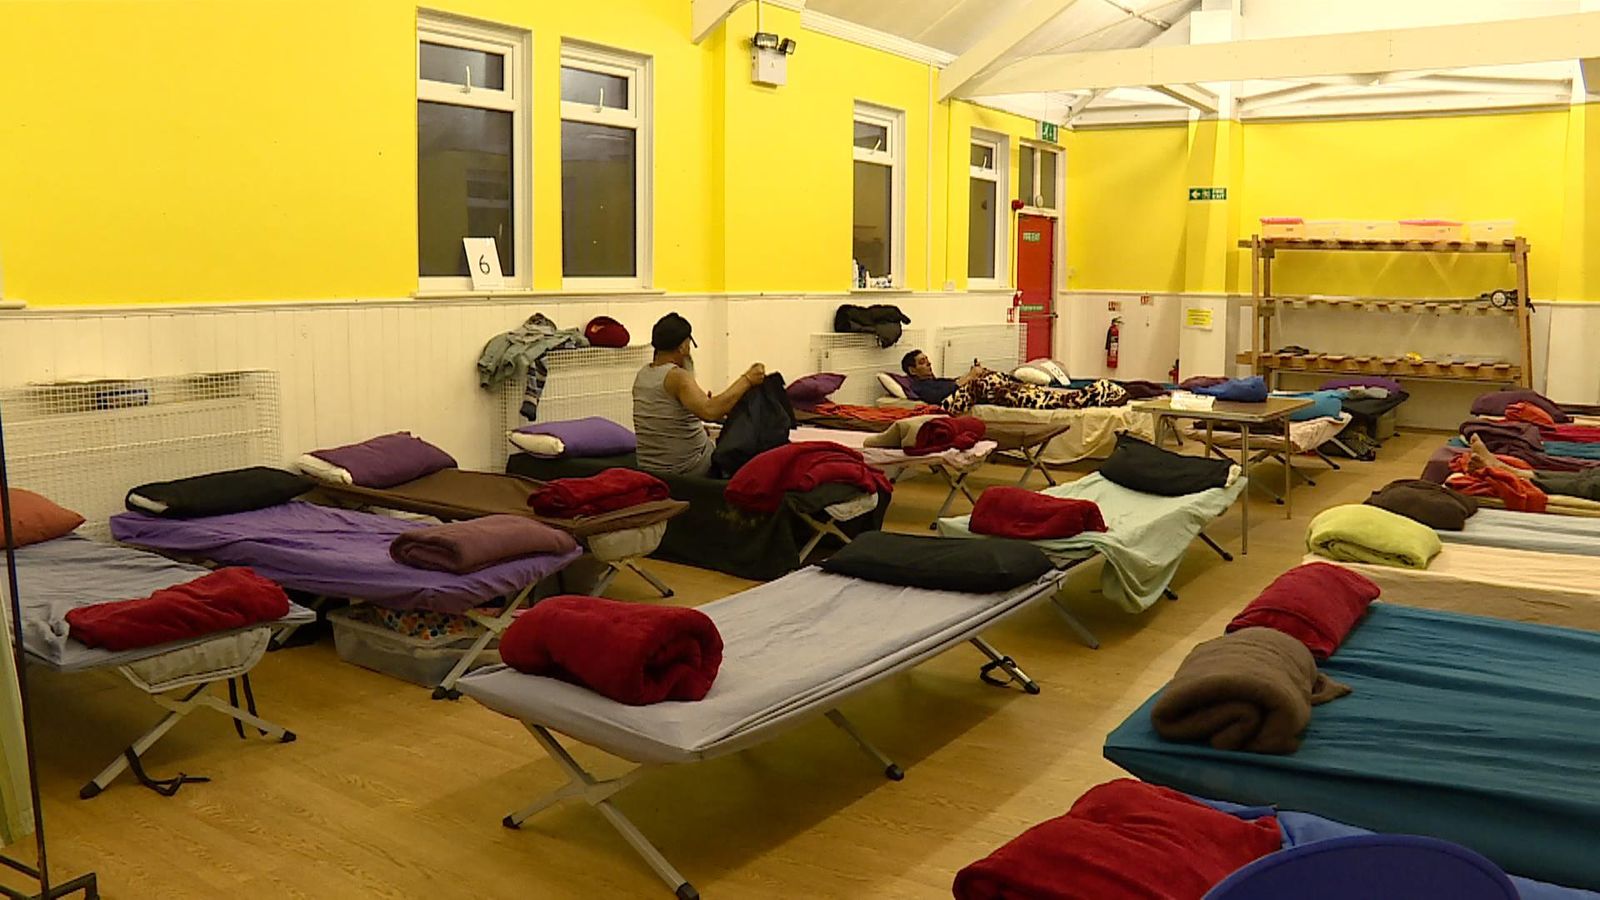 More Than 24000 People Will Spend Xmas Sleeping On The Streets Uk News Sky News 8412